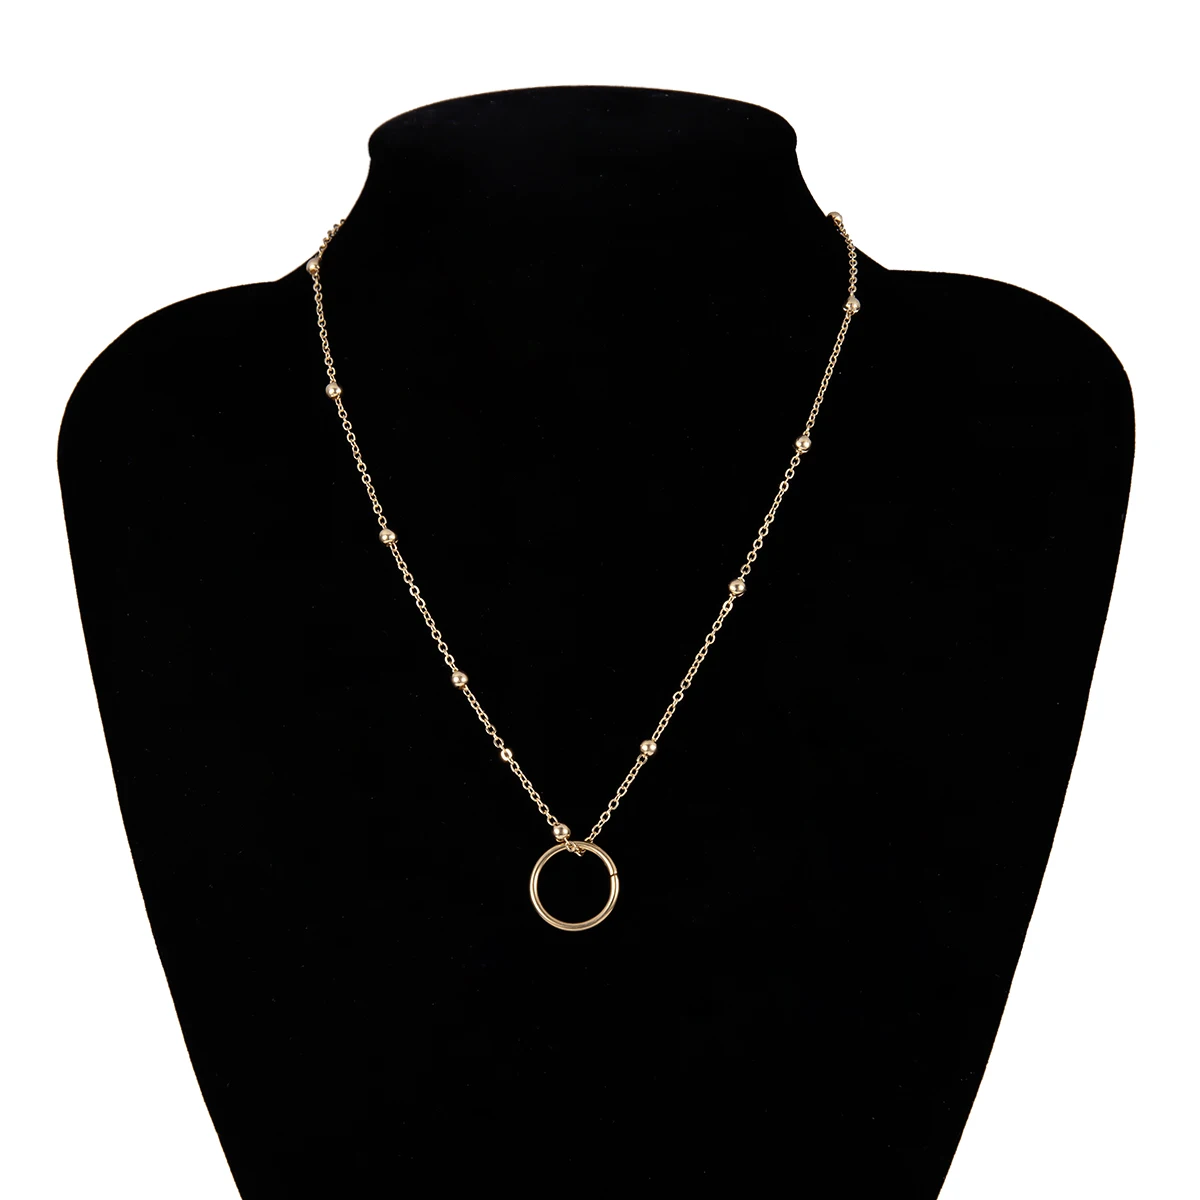 

Ingemark Tiny Simple Circle Pendant Choker Necklace for Women Girl New Fashion Gold Color Iron Chain Necklace Collier Femme 2019